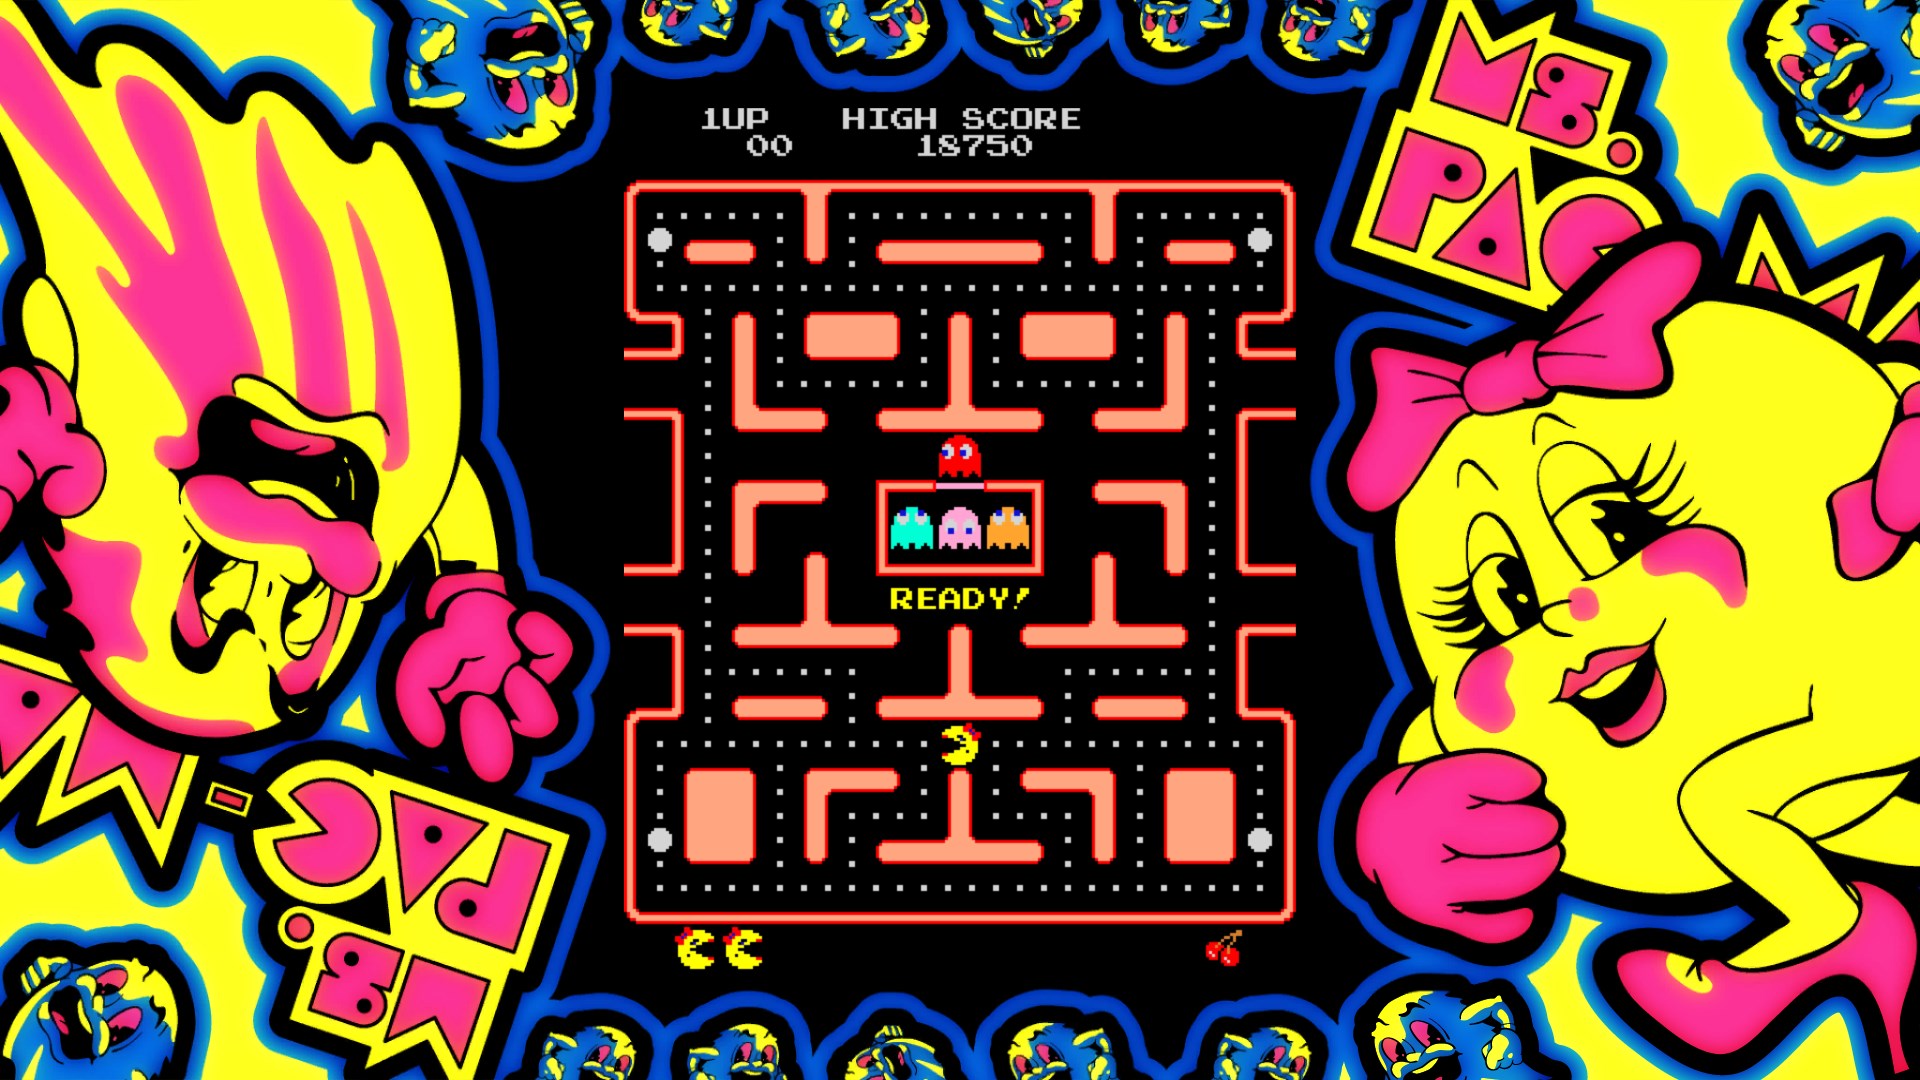 pacman for xbox one